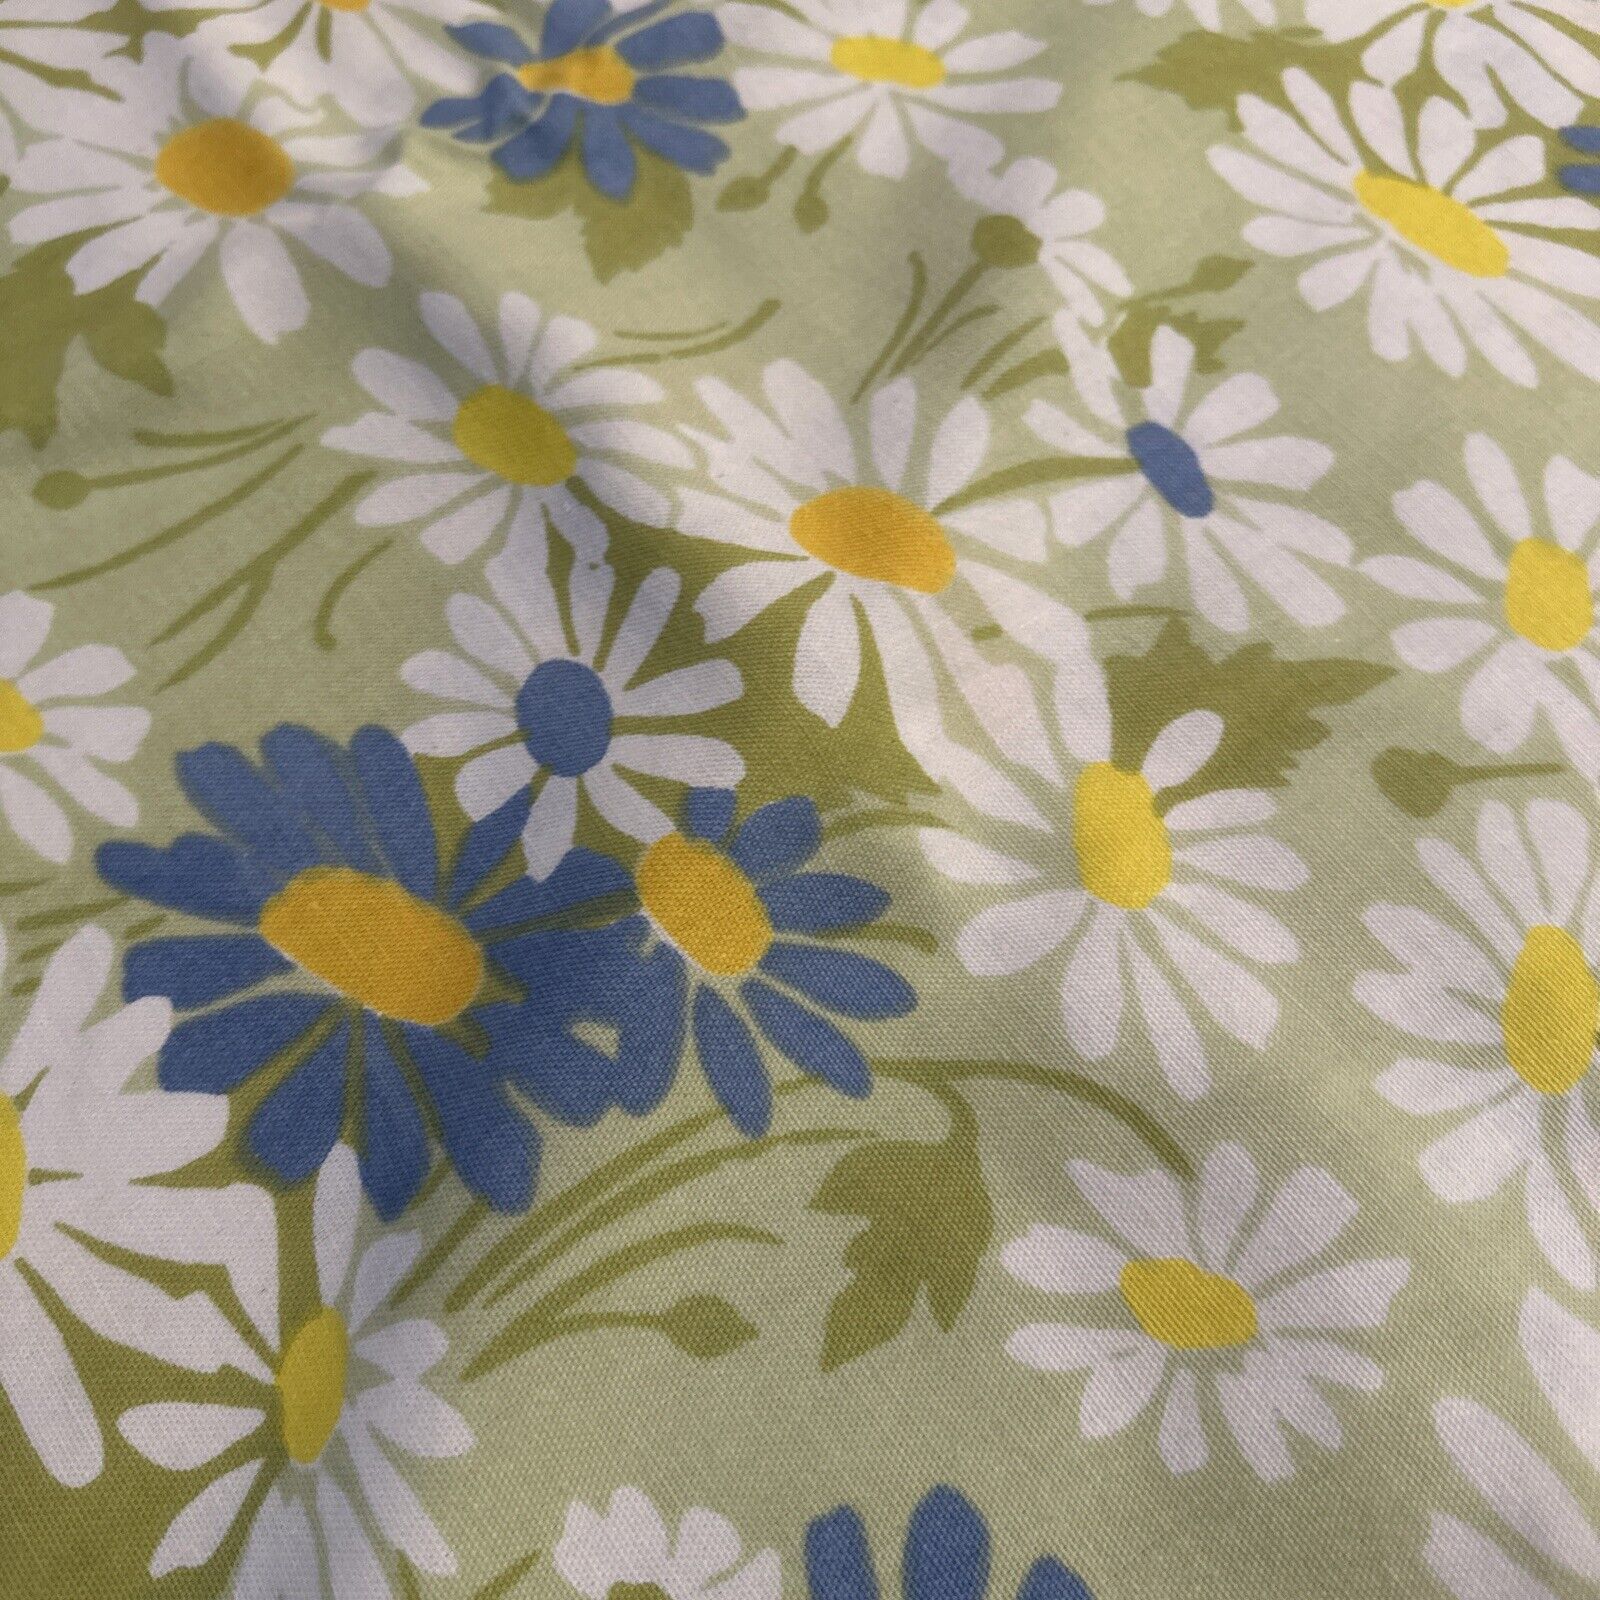 Vintage 1970s MCM Daisy Flower Power Linen Finished Edge Fabric/Tablecloth 60x82